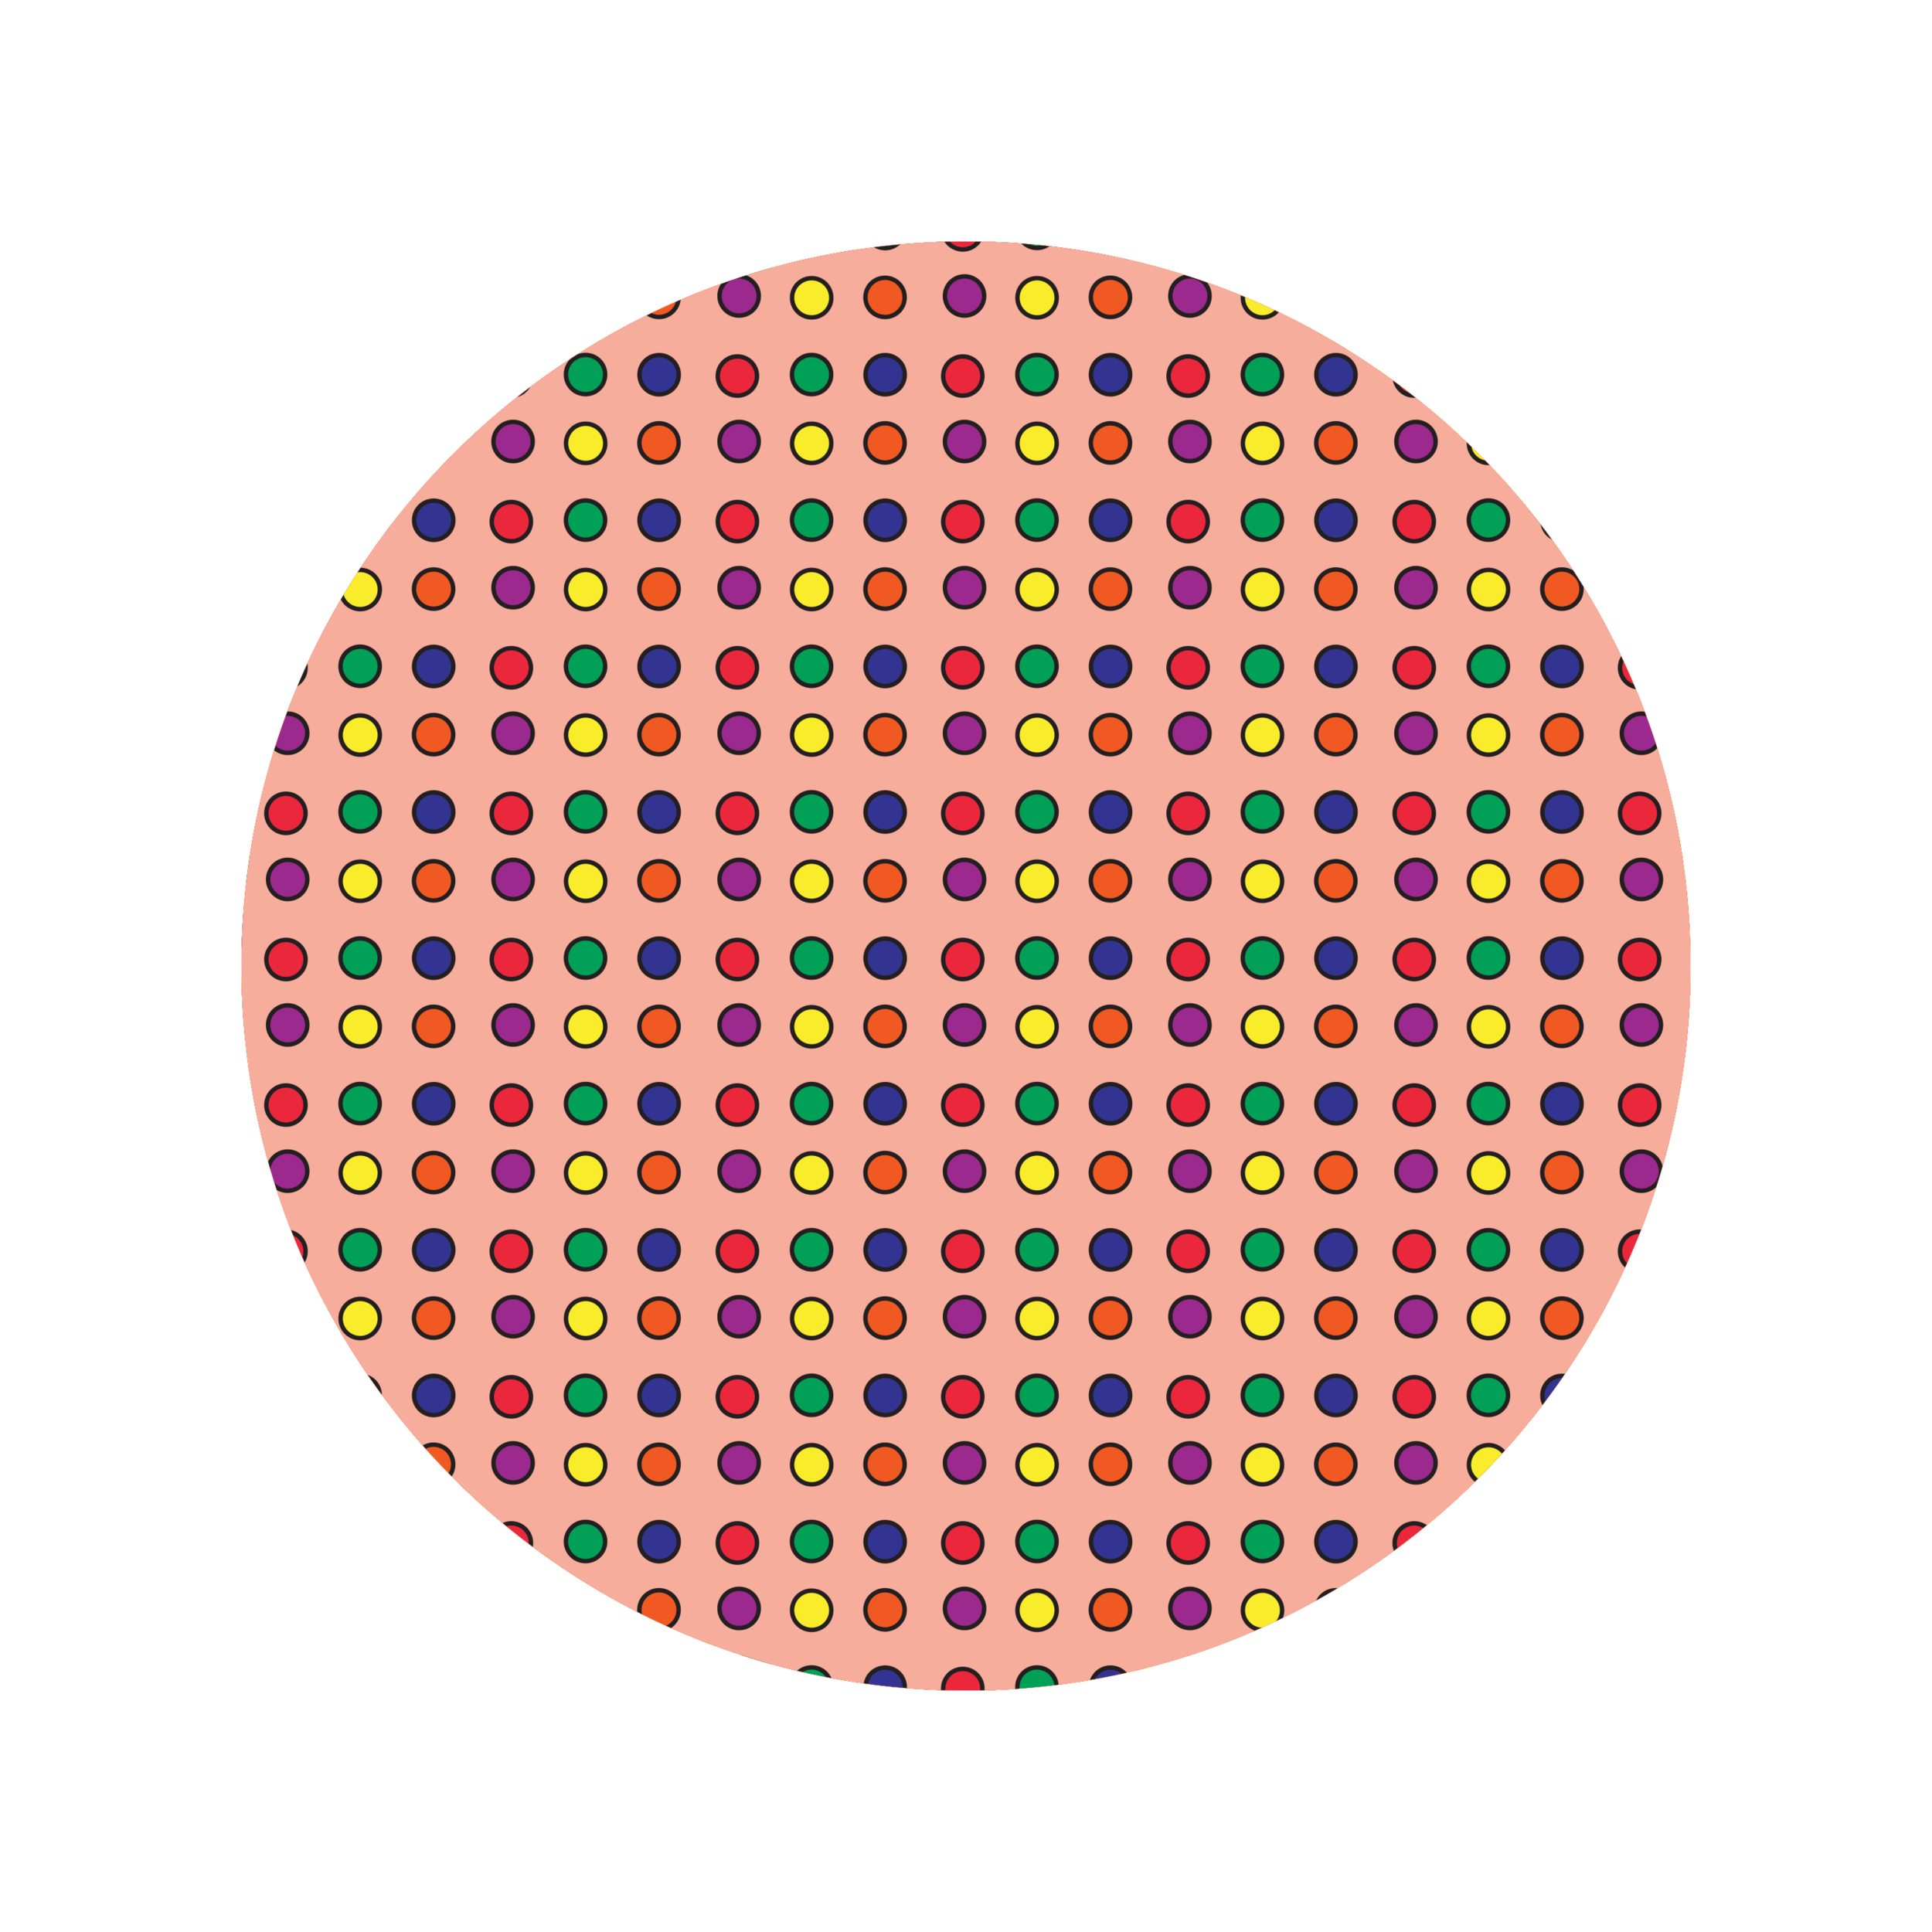 13a.circle swatches peach gridded dots.png